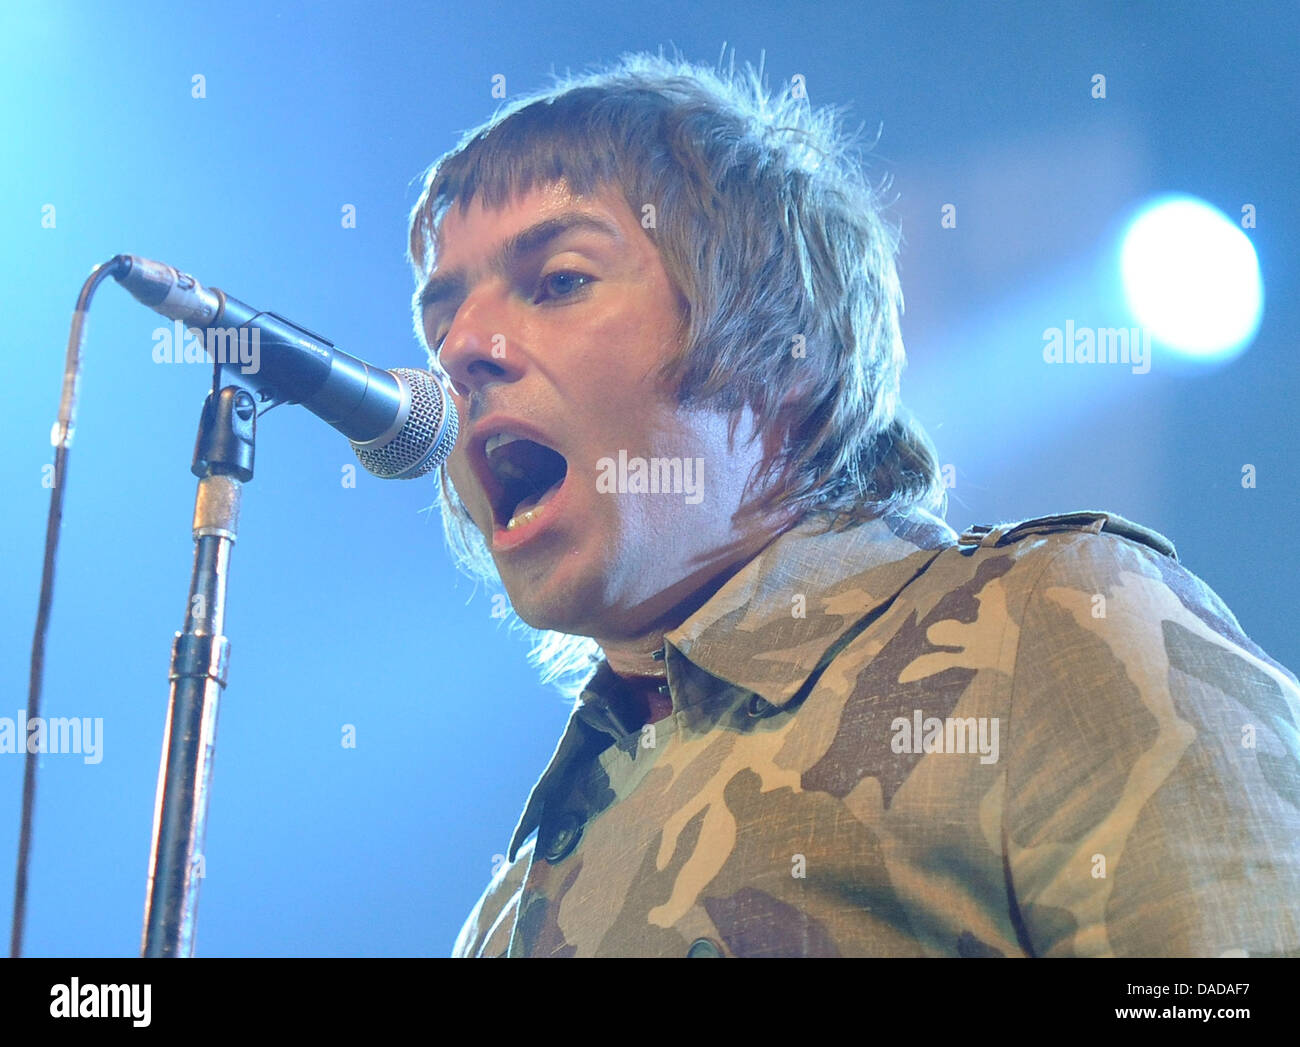 Singer Liam Gallagher of the British band Beady Eye gives a concert at the Columbiahalle in Berlin, Germany, 14 October 2011. The last four members of the band Oasis are now part of the rock band Beady Eye. Photo: Britta Pedersen Stock Photo